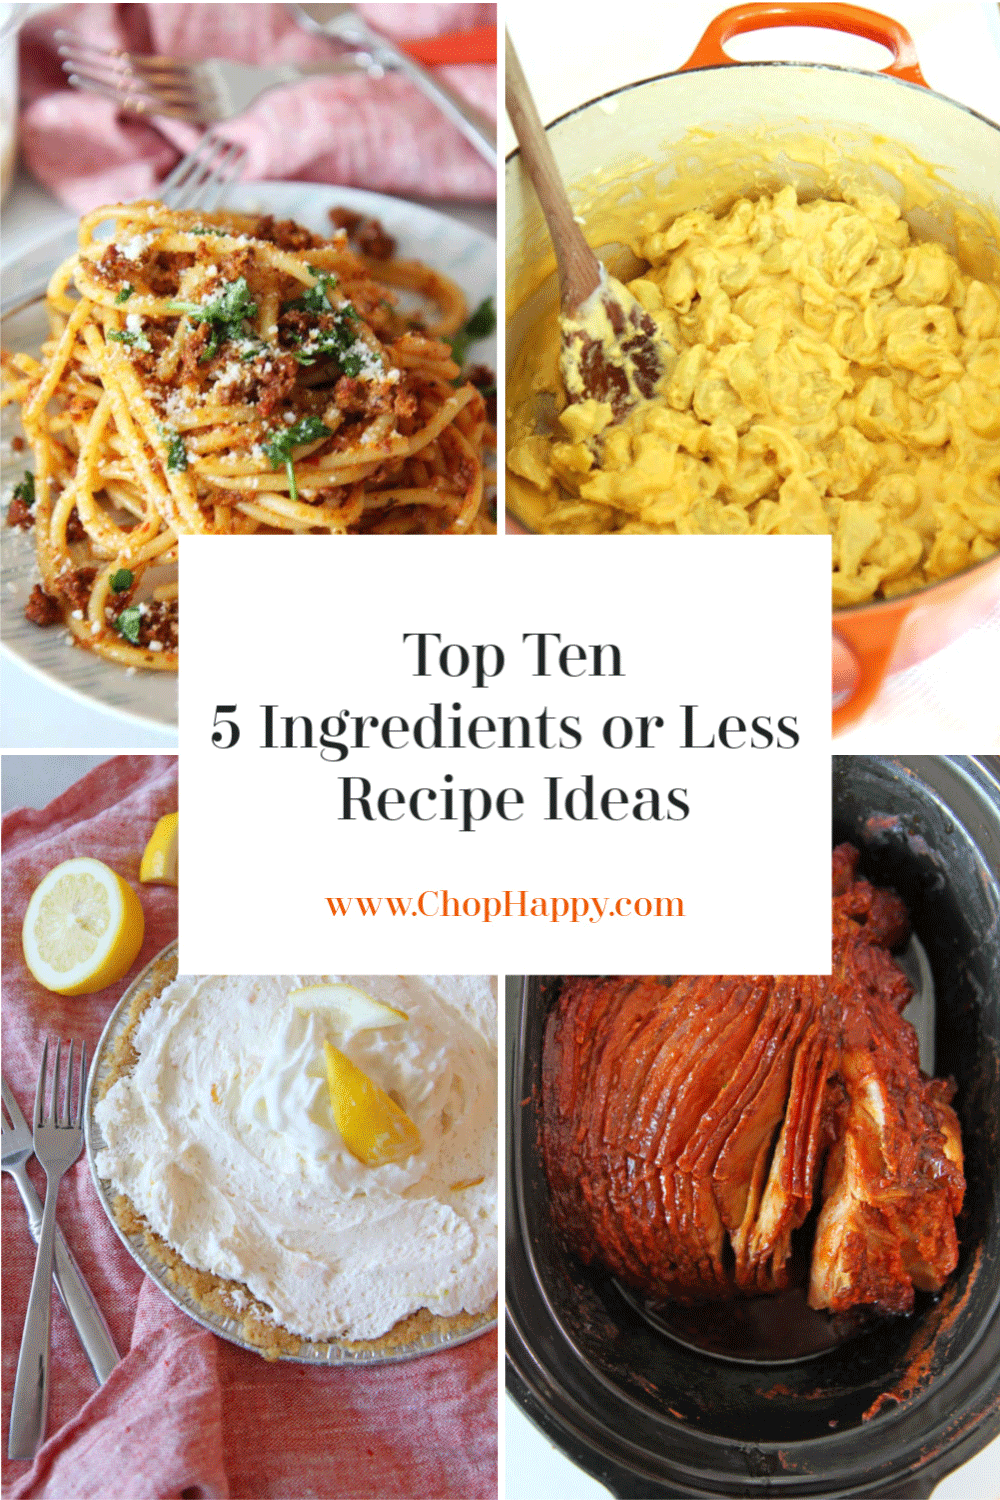 10 Simple Recipes With 5 Ingredients or Less